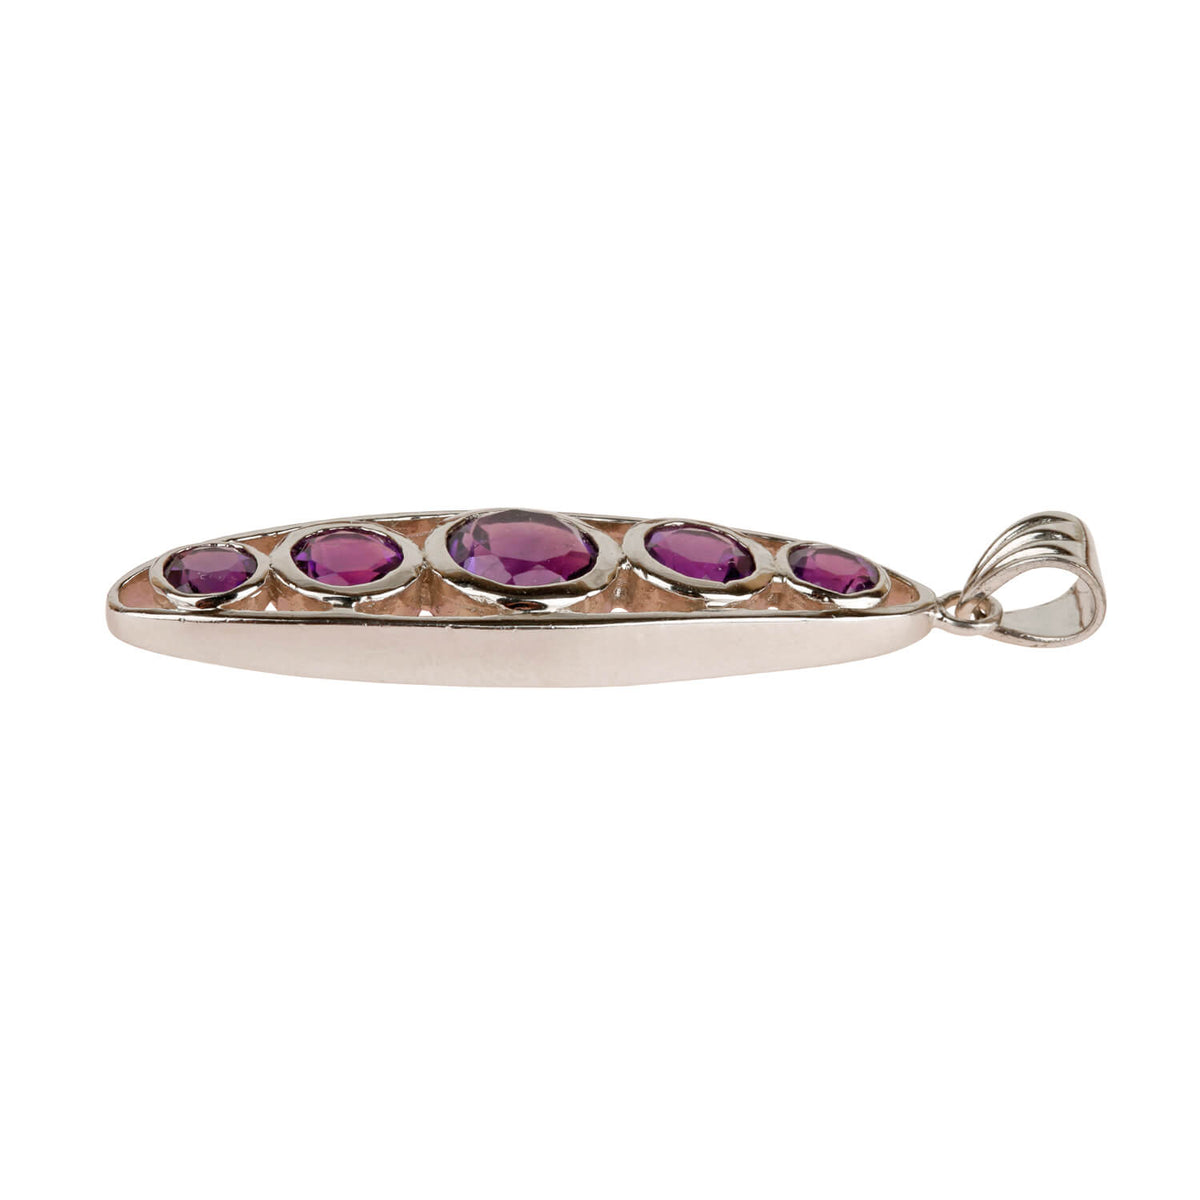 Round Amethyst oval silver 925 pendant